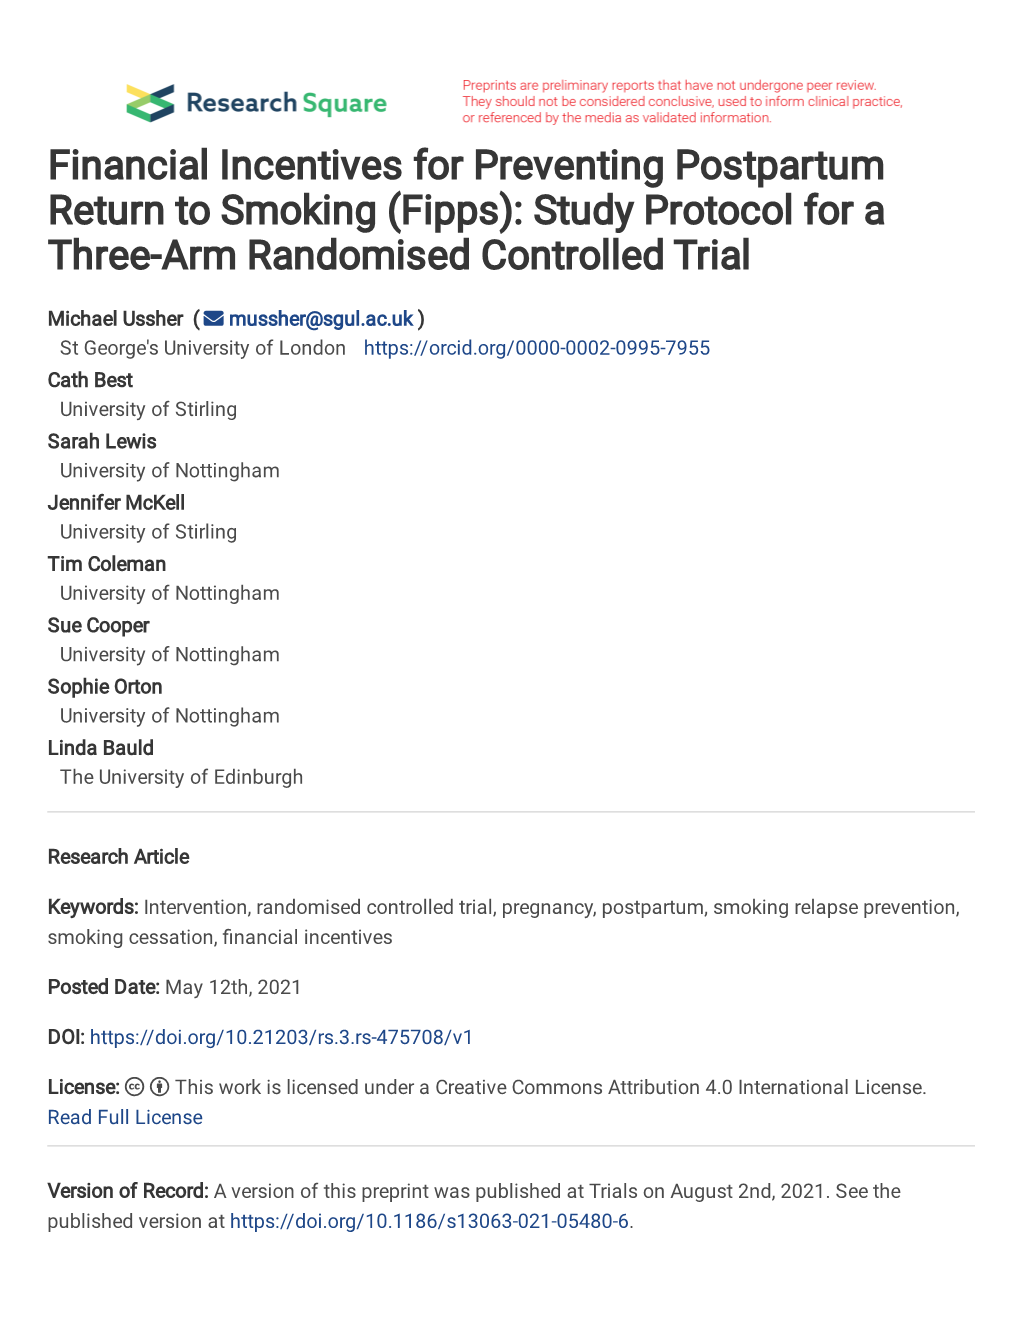 Financial Incentives for Preventing Postpartum Return to Smoking (Fipps): Study Protocol for a Three-Arm Randomised Controlled Trial